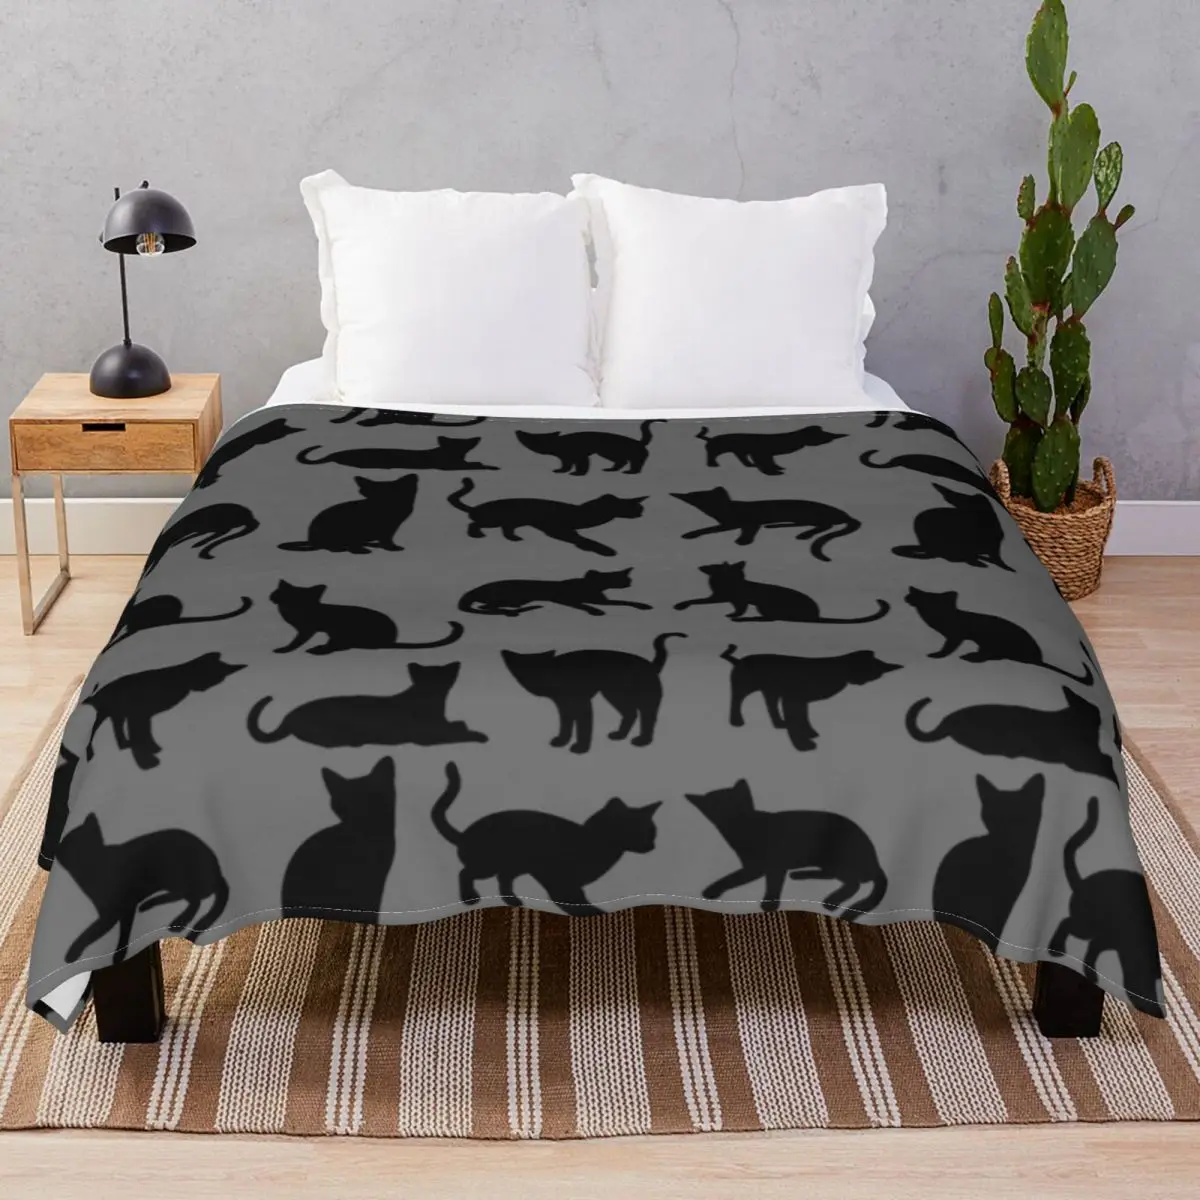 Black Cats Blanket Fleece Spring Autumn Soft Unisex Throw Blankets for Bed Sofa Camp Office